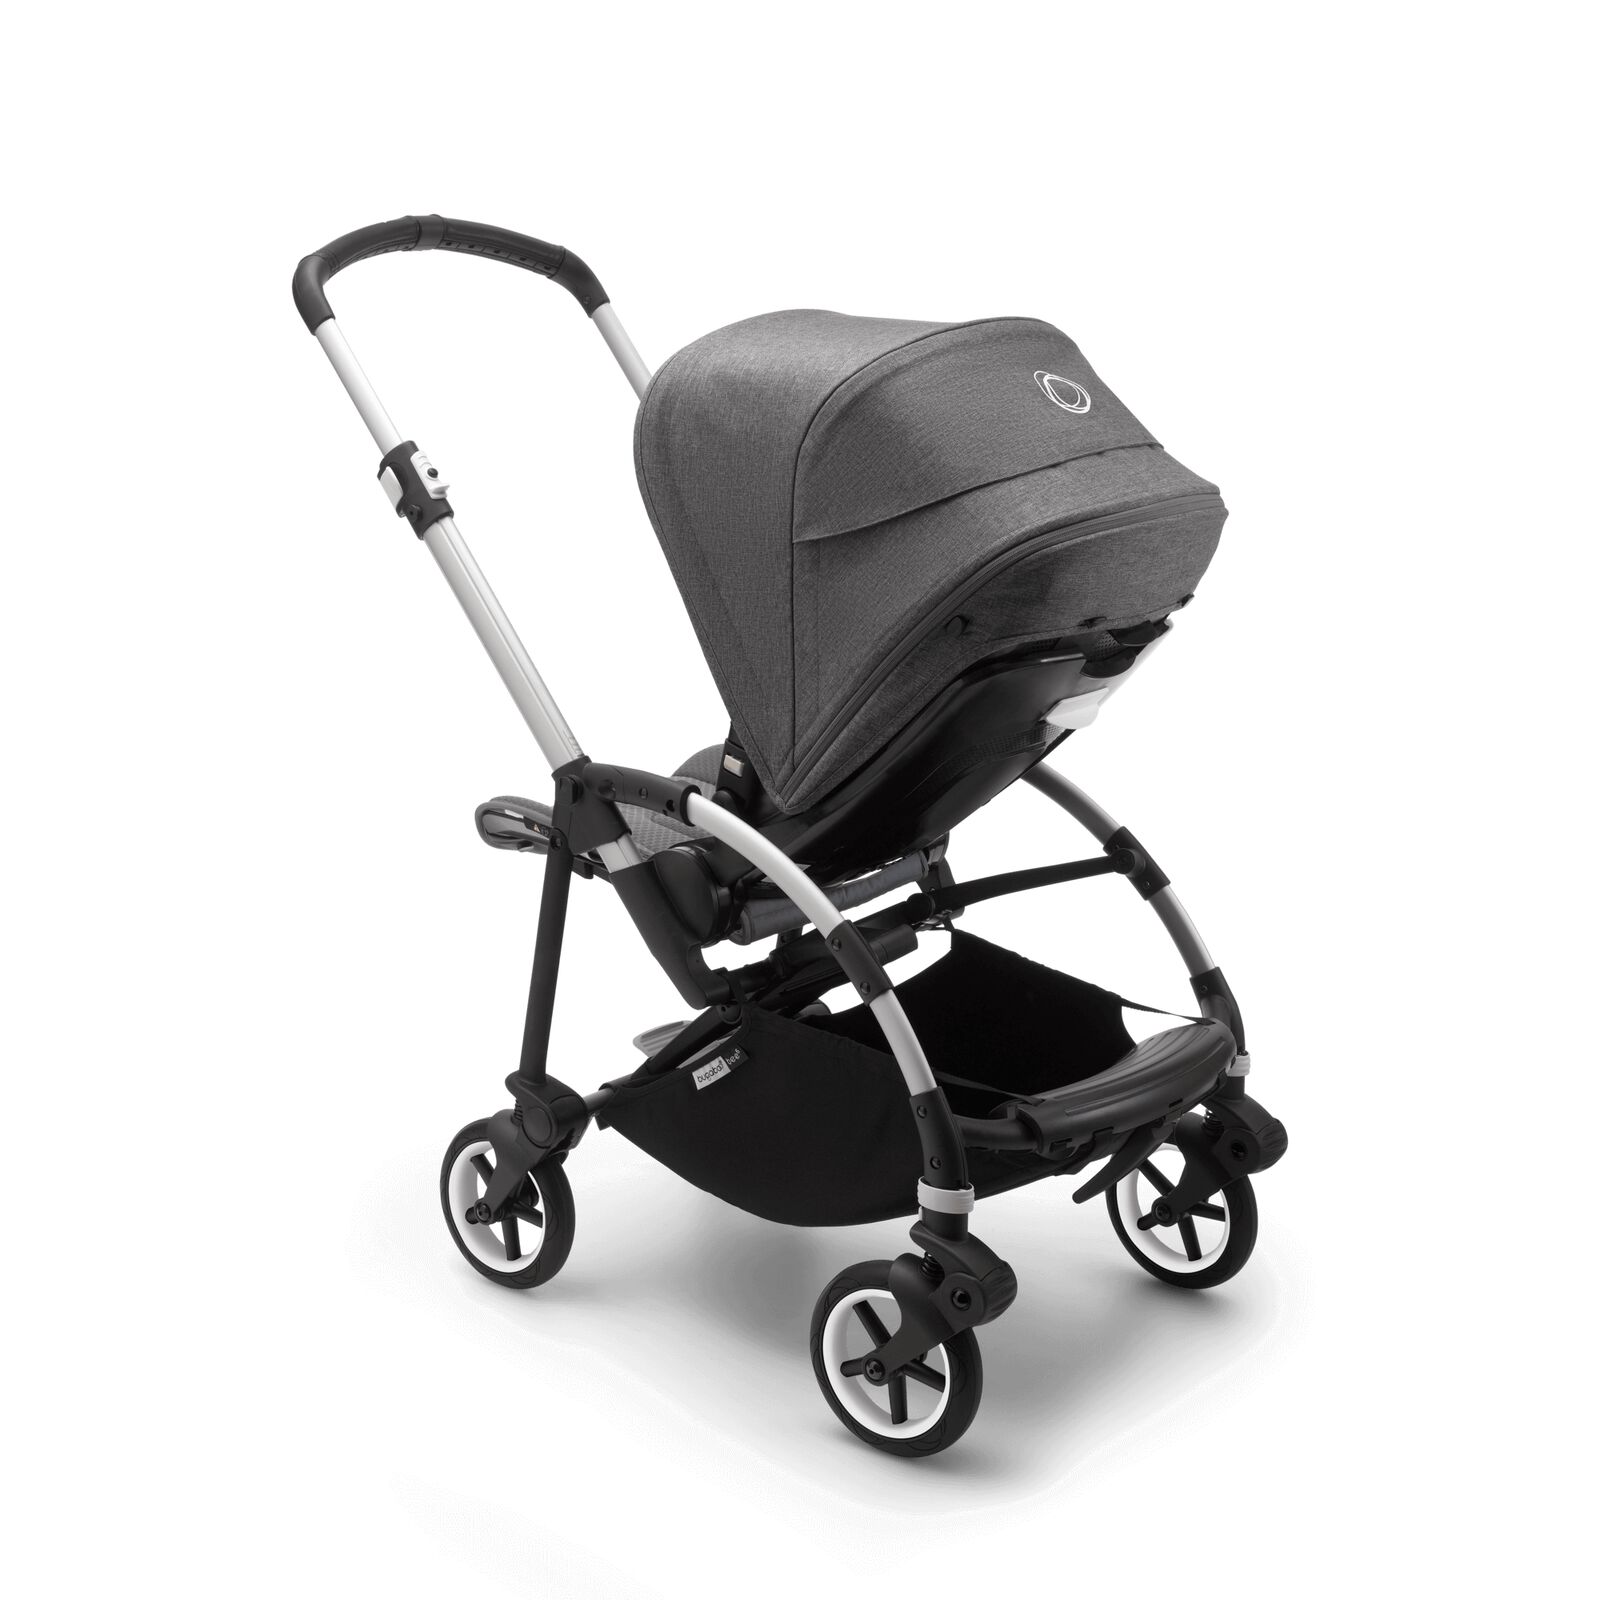 Bugaboo Bee 6 seat and bassinet stroller - View 5